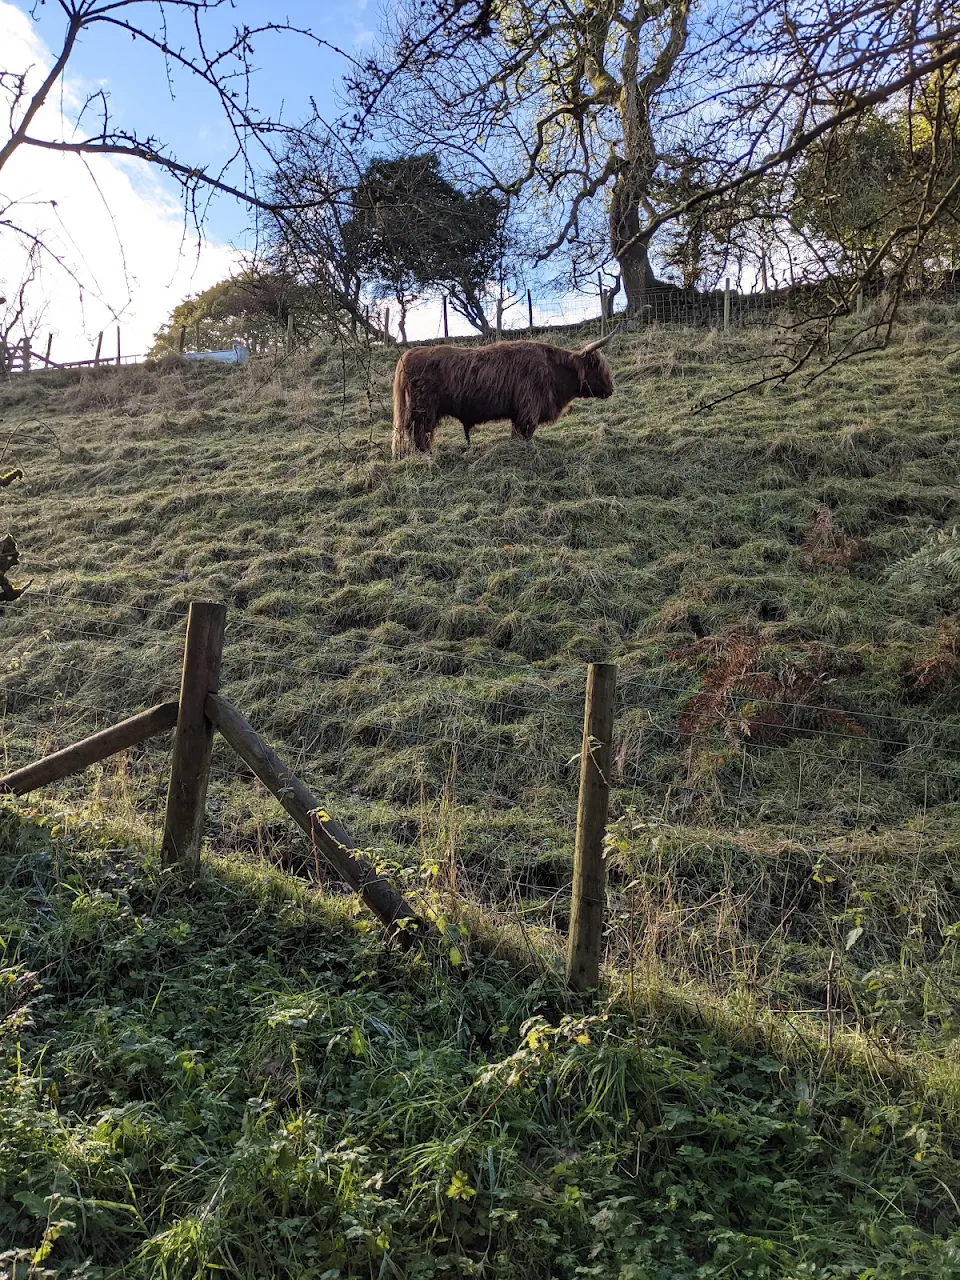 Came across this bull grazing